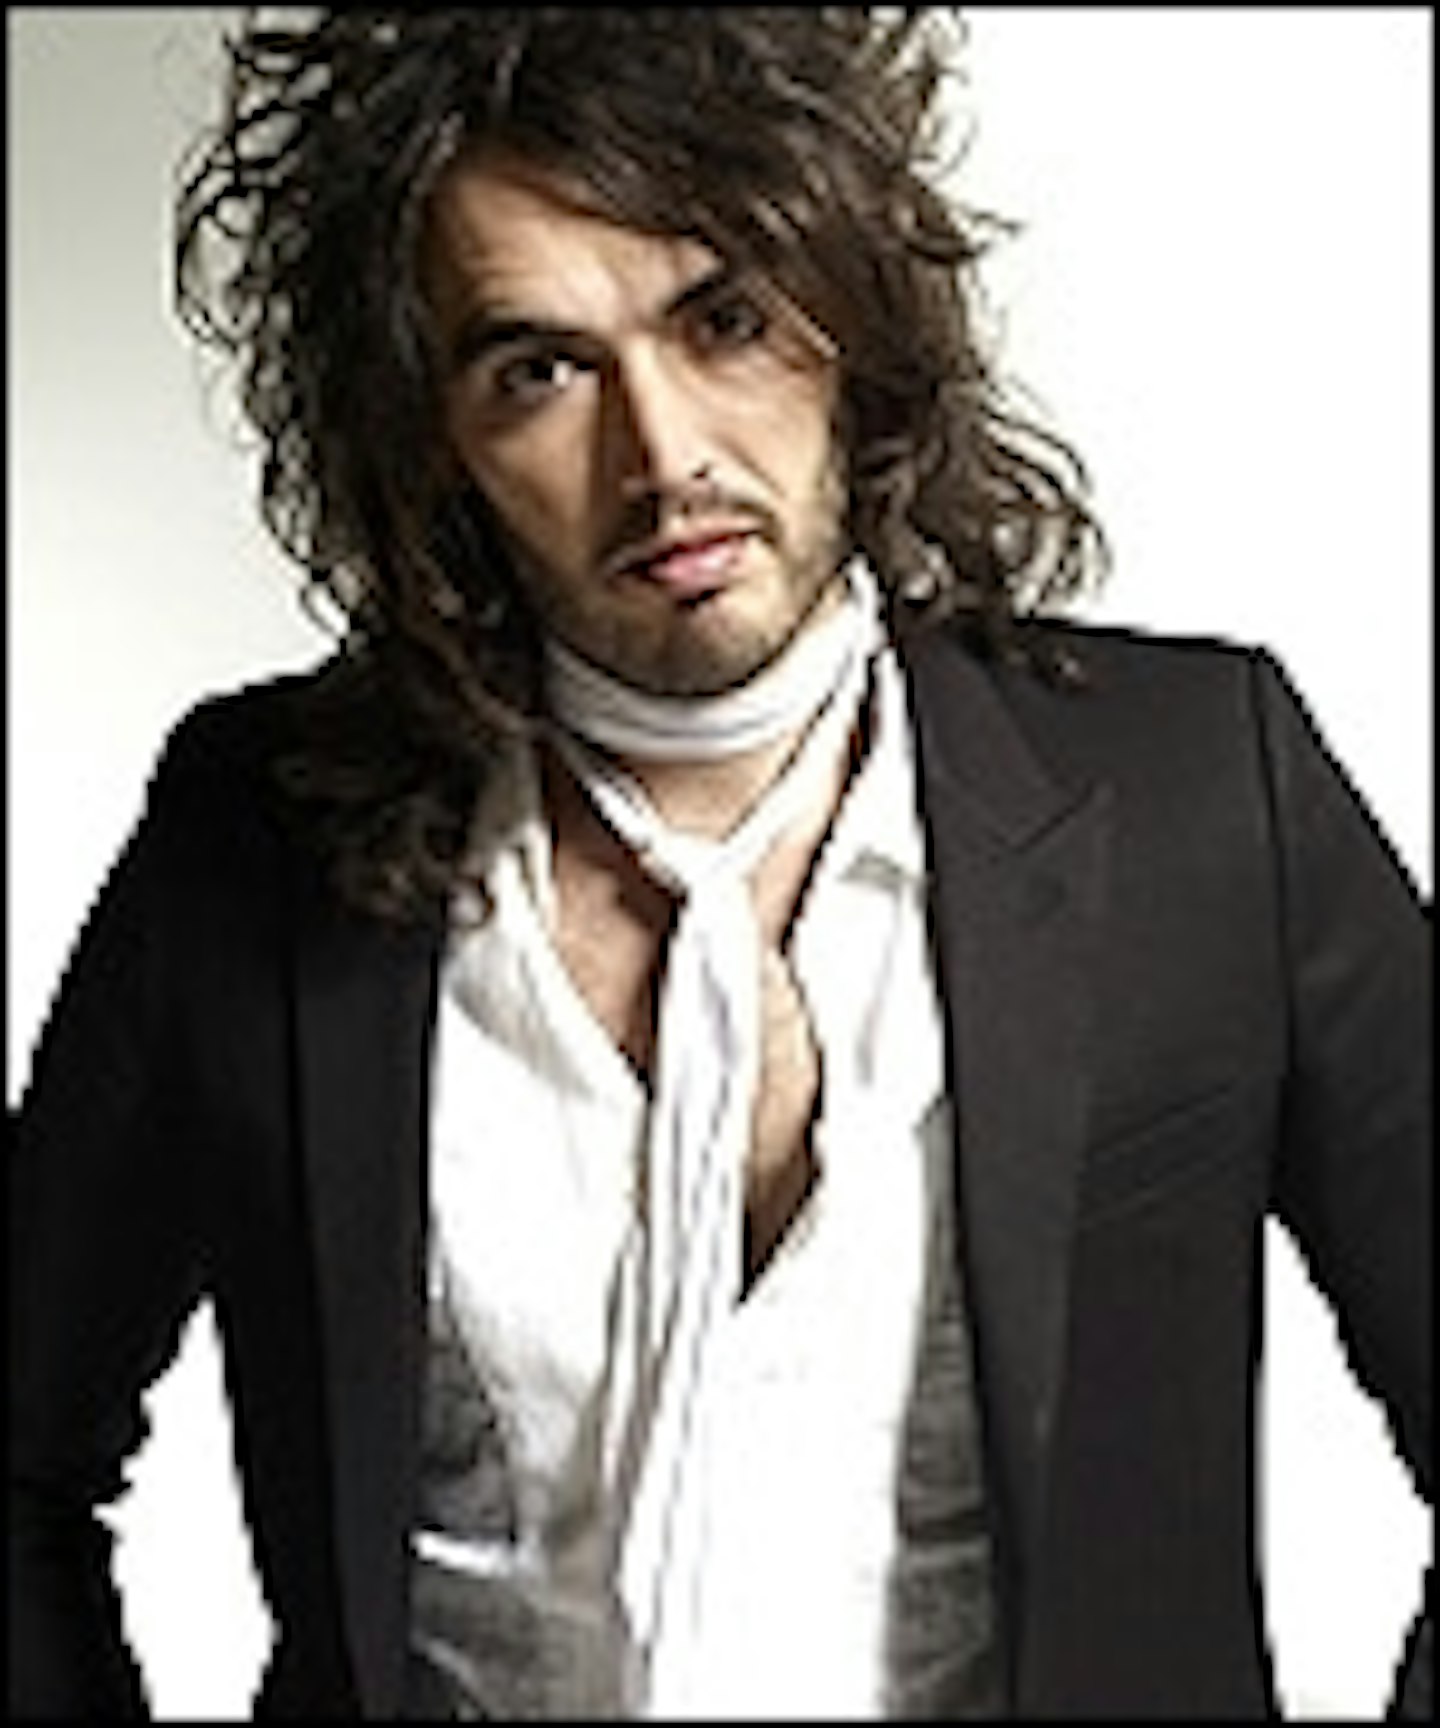 Russell Brand May Get Musical Again